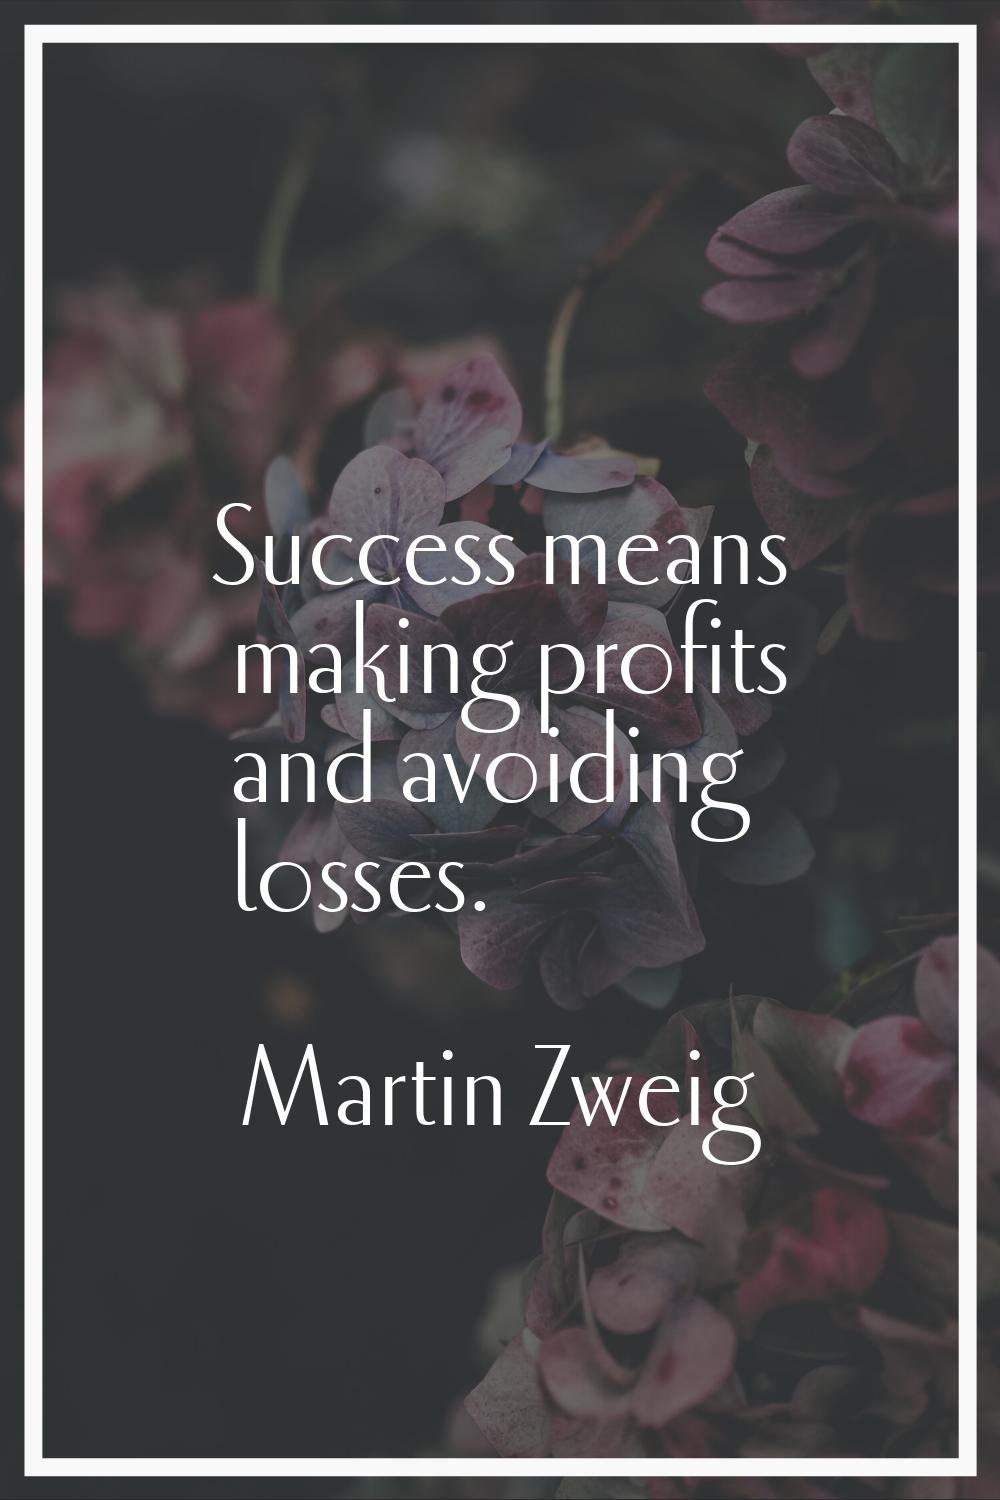 Success means making profits and avoiding losses.